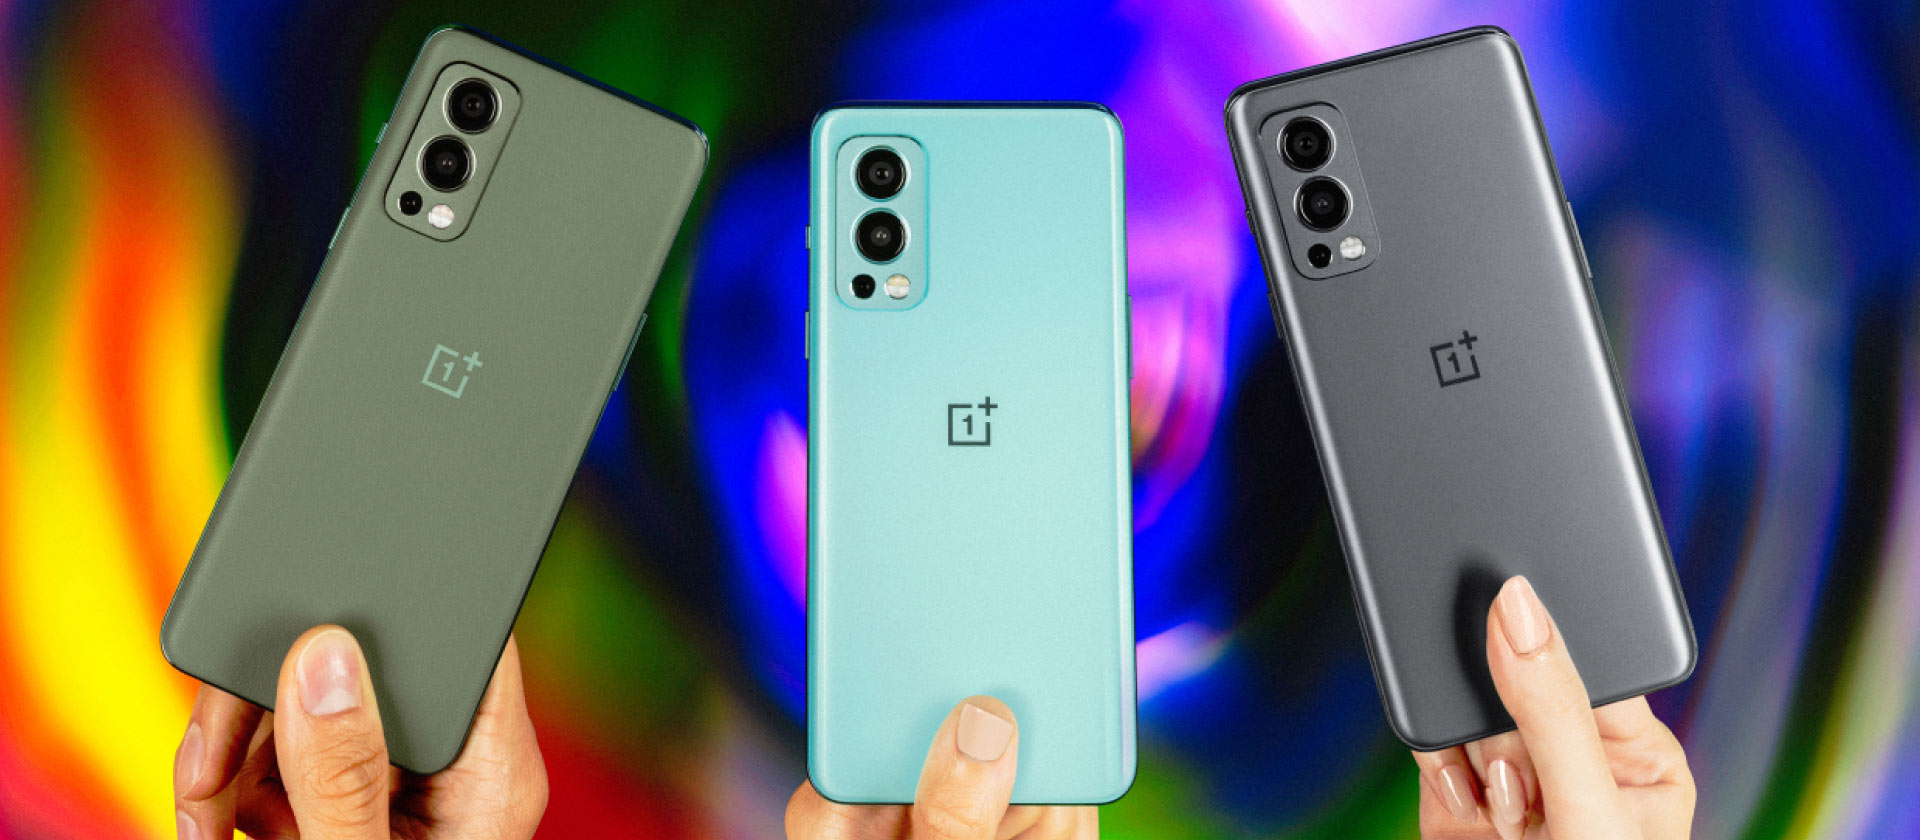 ONEPLUS NORD 2 Launched With MediaTek Dimensity 1200 AI Chipset